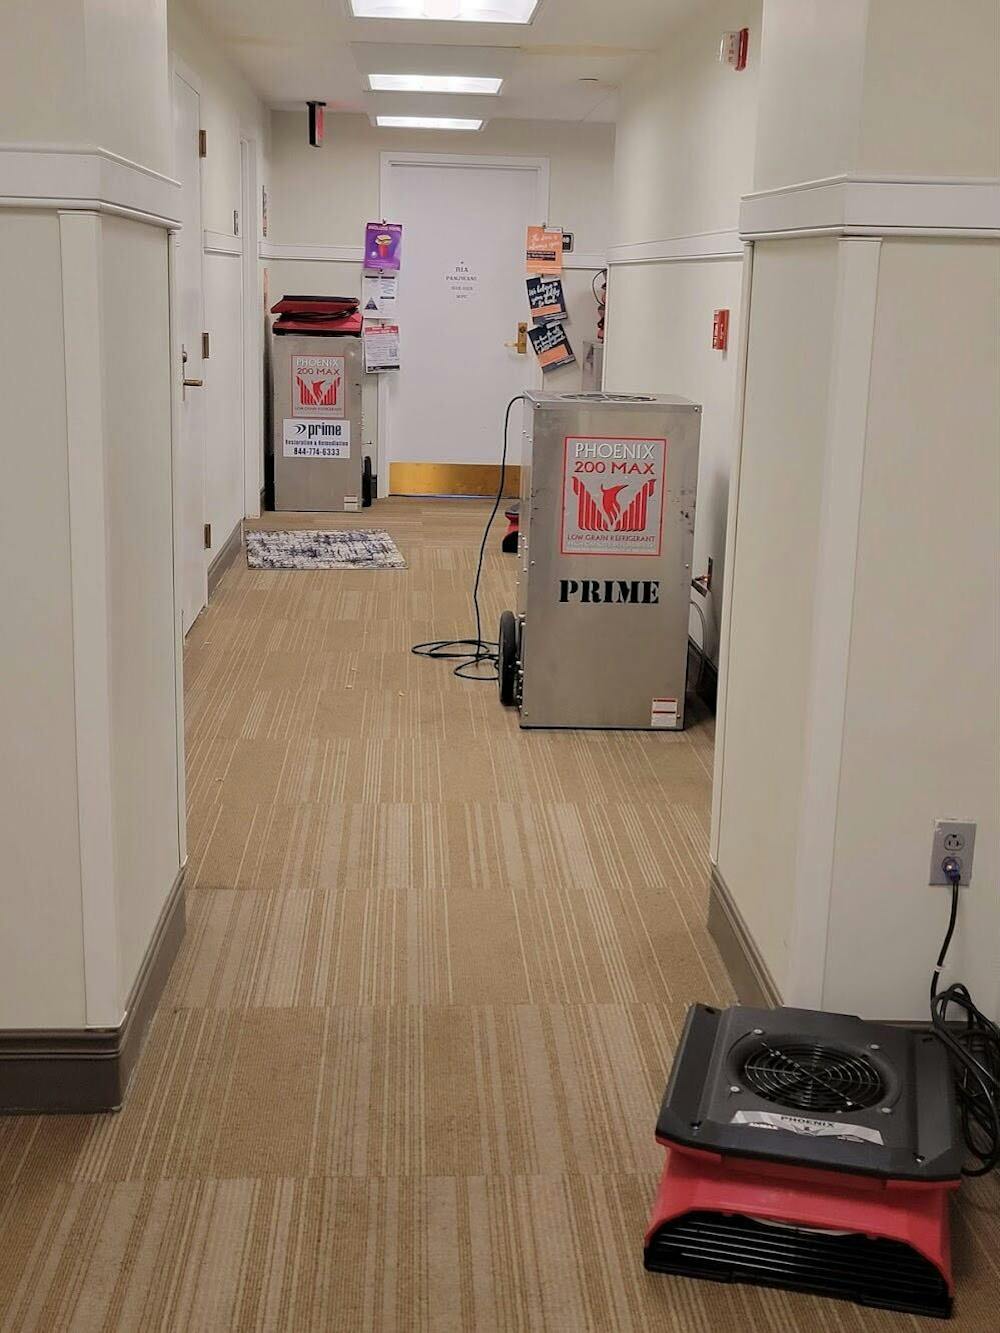 <p>Dehumidifiers and heavy-duty fans were used to remove flood water from East Andrews.</p><p>Courtesy of Chris Nguyen</p>